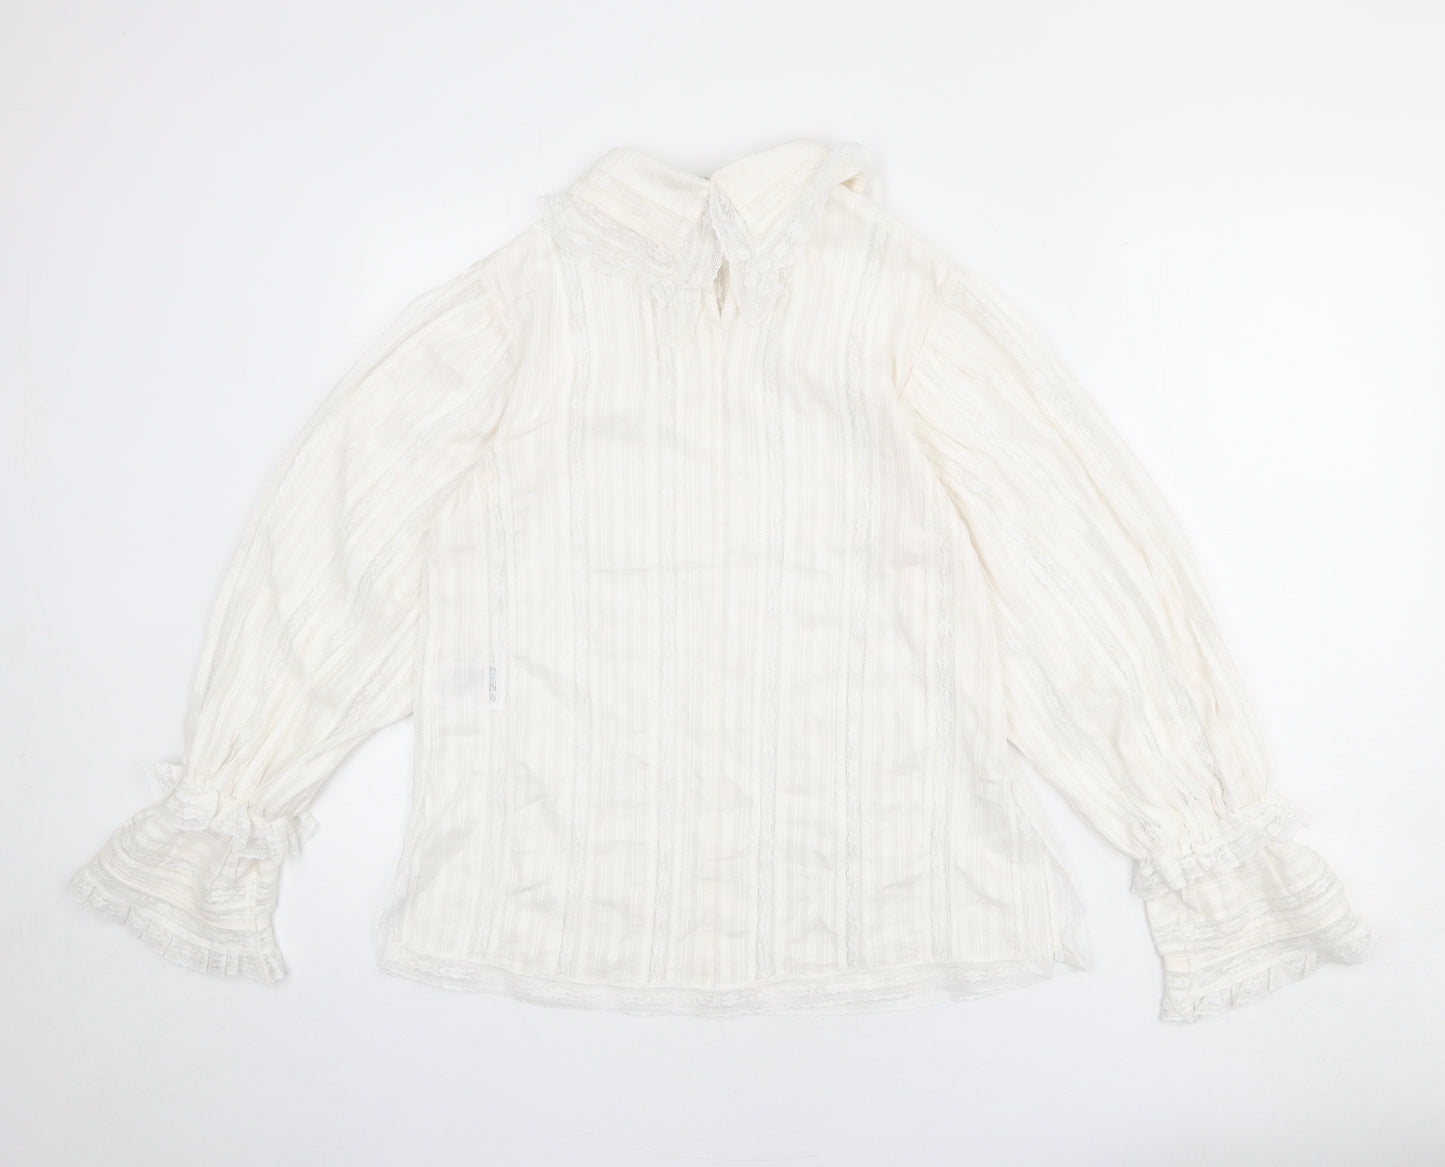 H&M Womens Ivory Striped Cotton Basic Blouse Size 12 Collared - Lace Detail